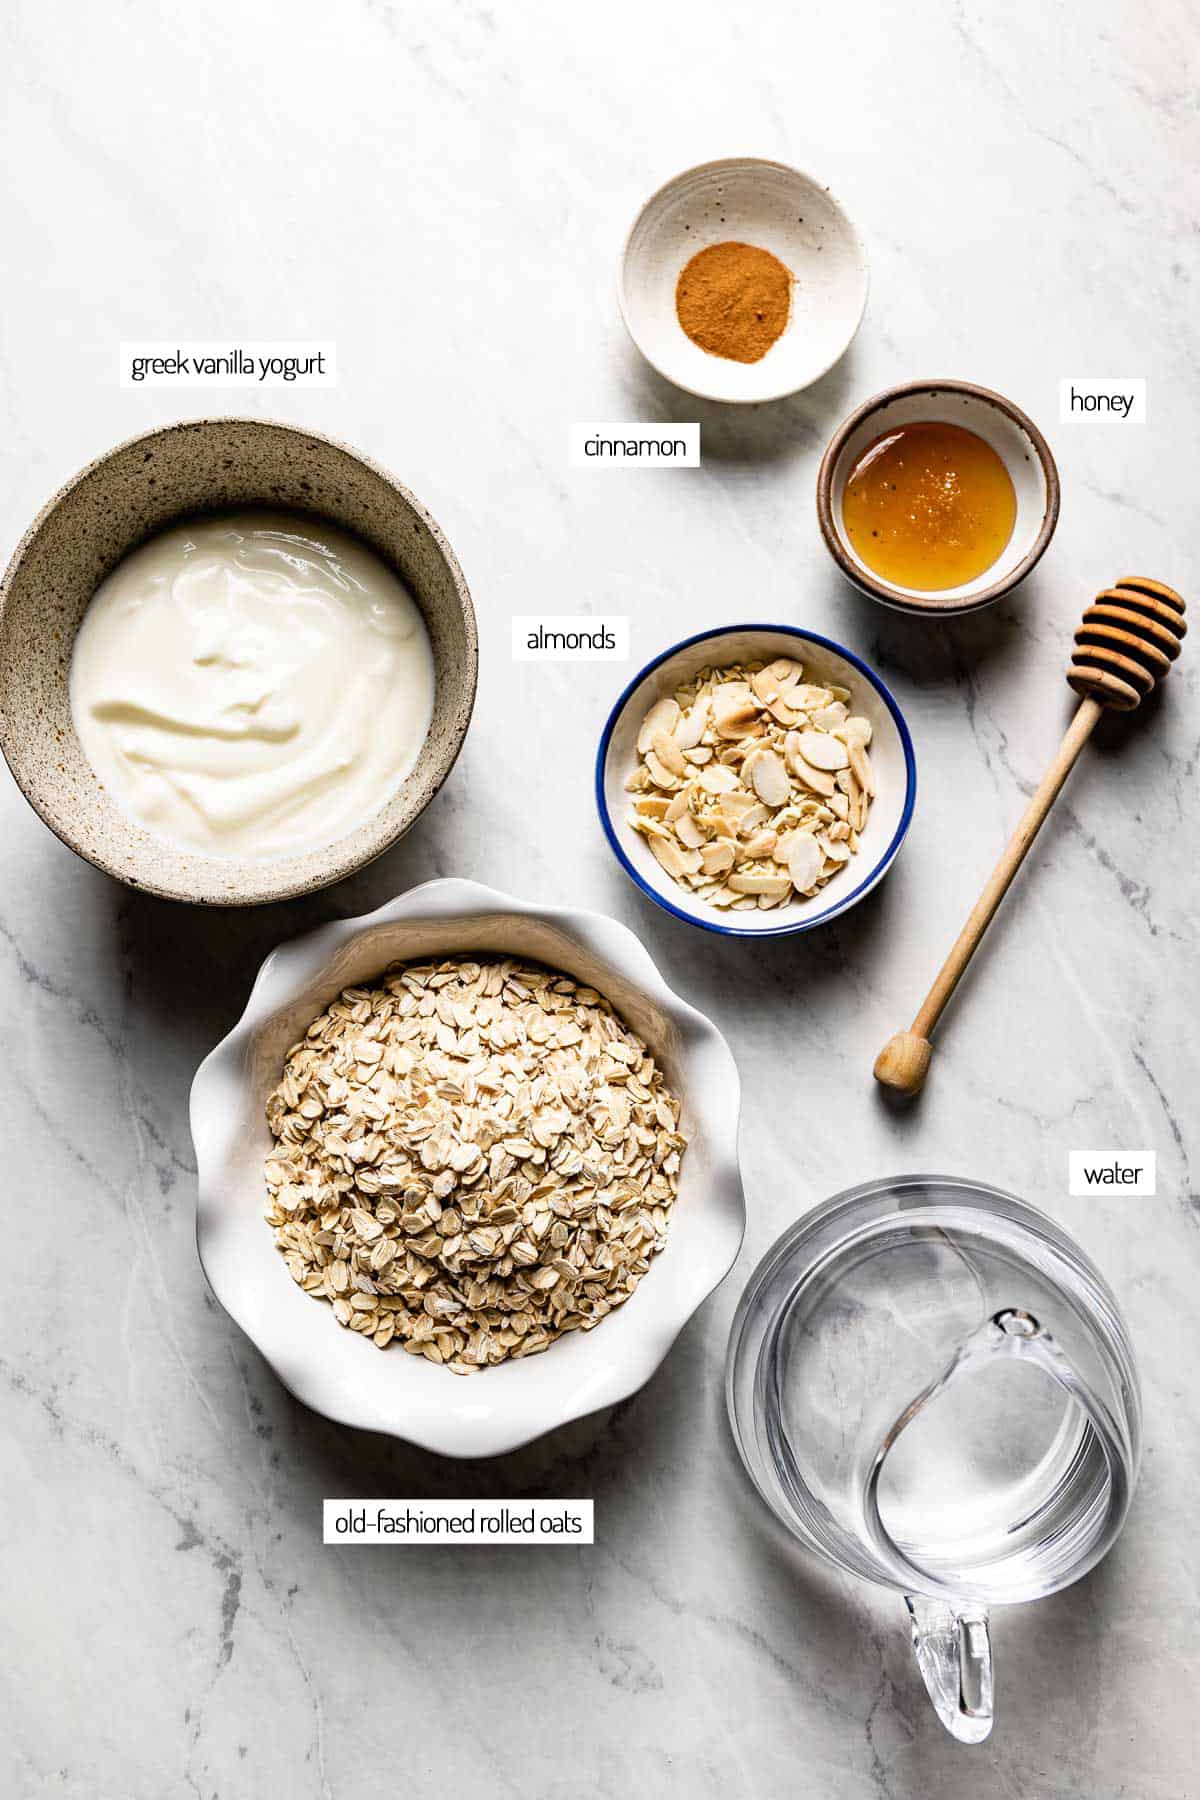 Ingredients for a greek yogurt and oatmeal recipe in bowls from the top view.